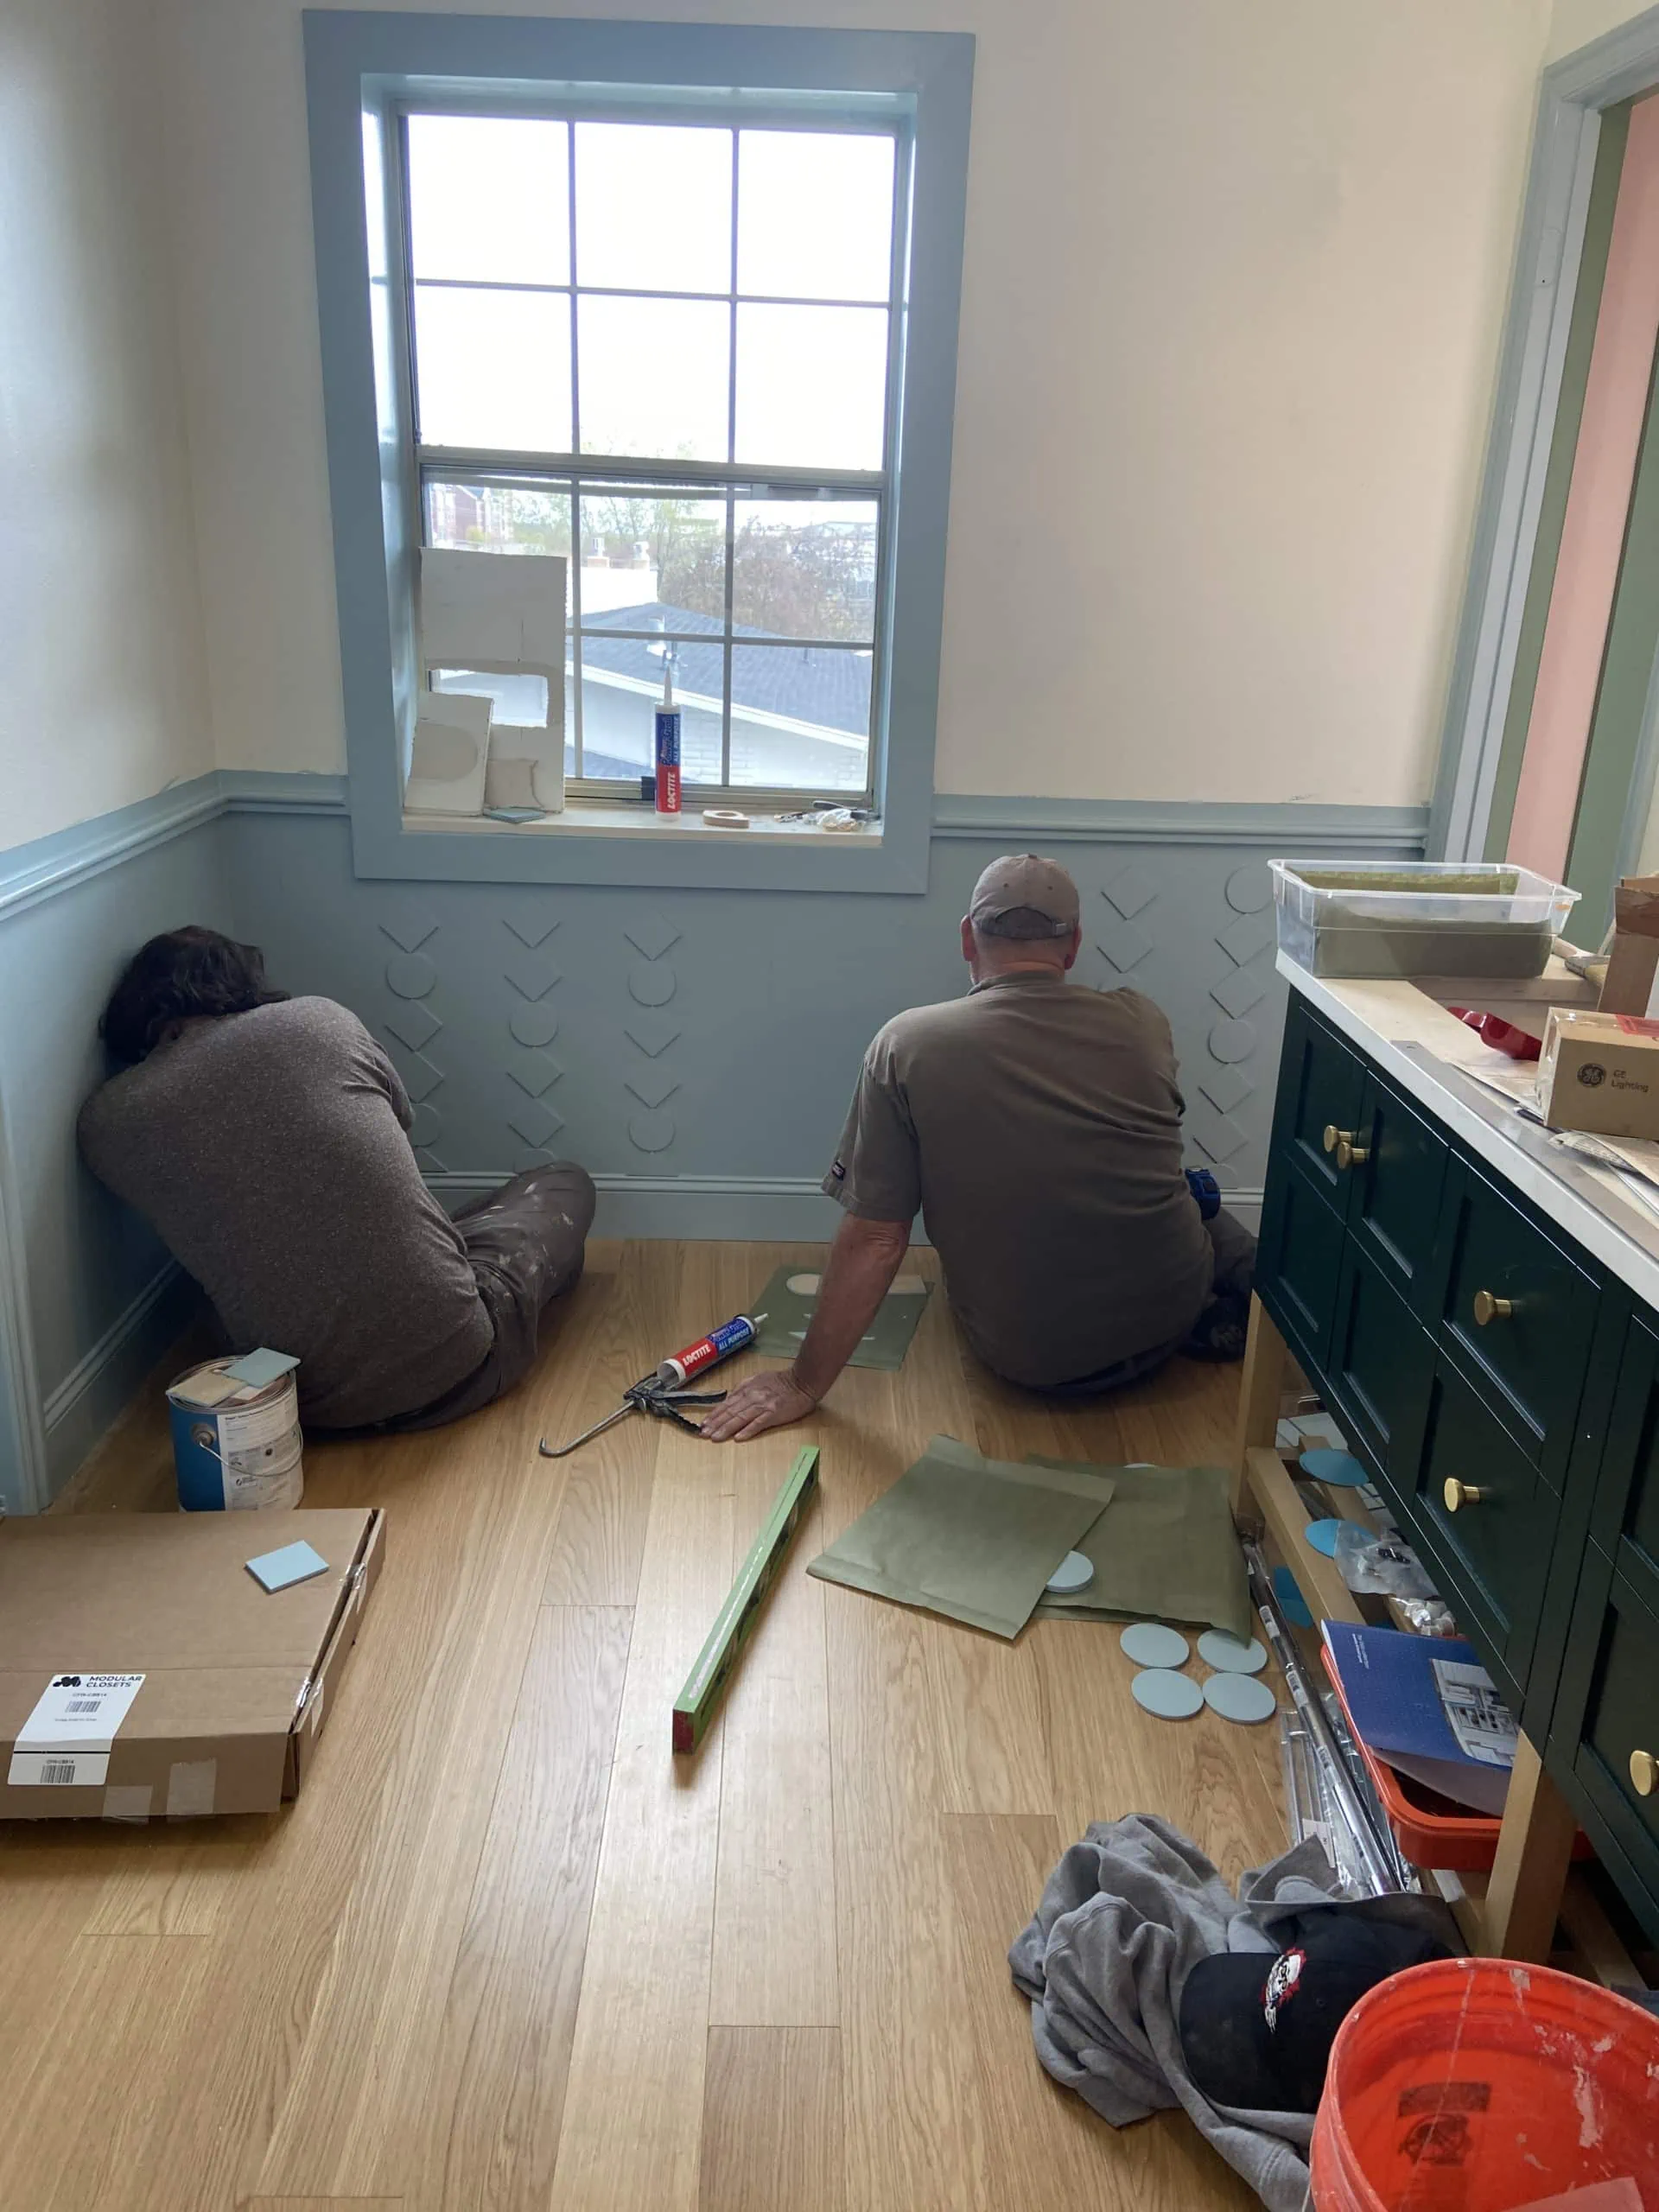 Two workmen glue up wooden cutouts as a custom DIY wainscoting.